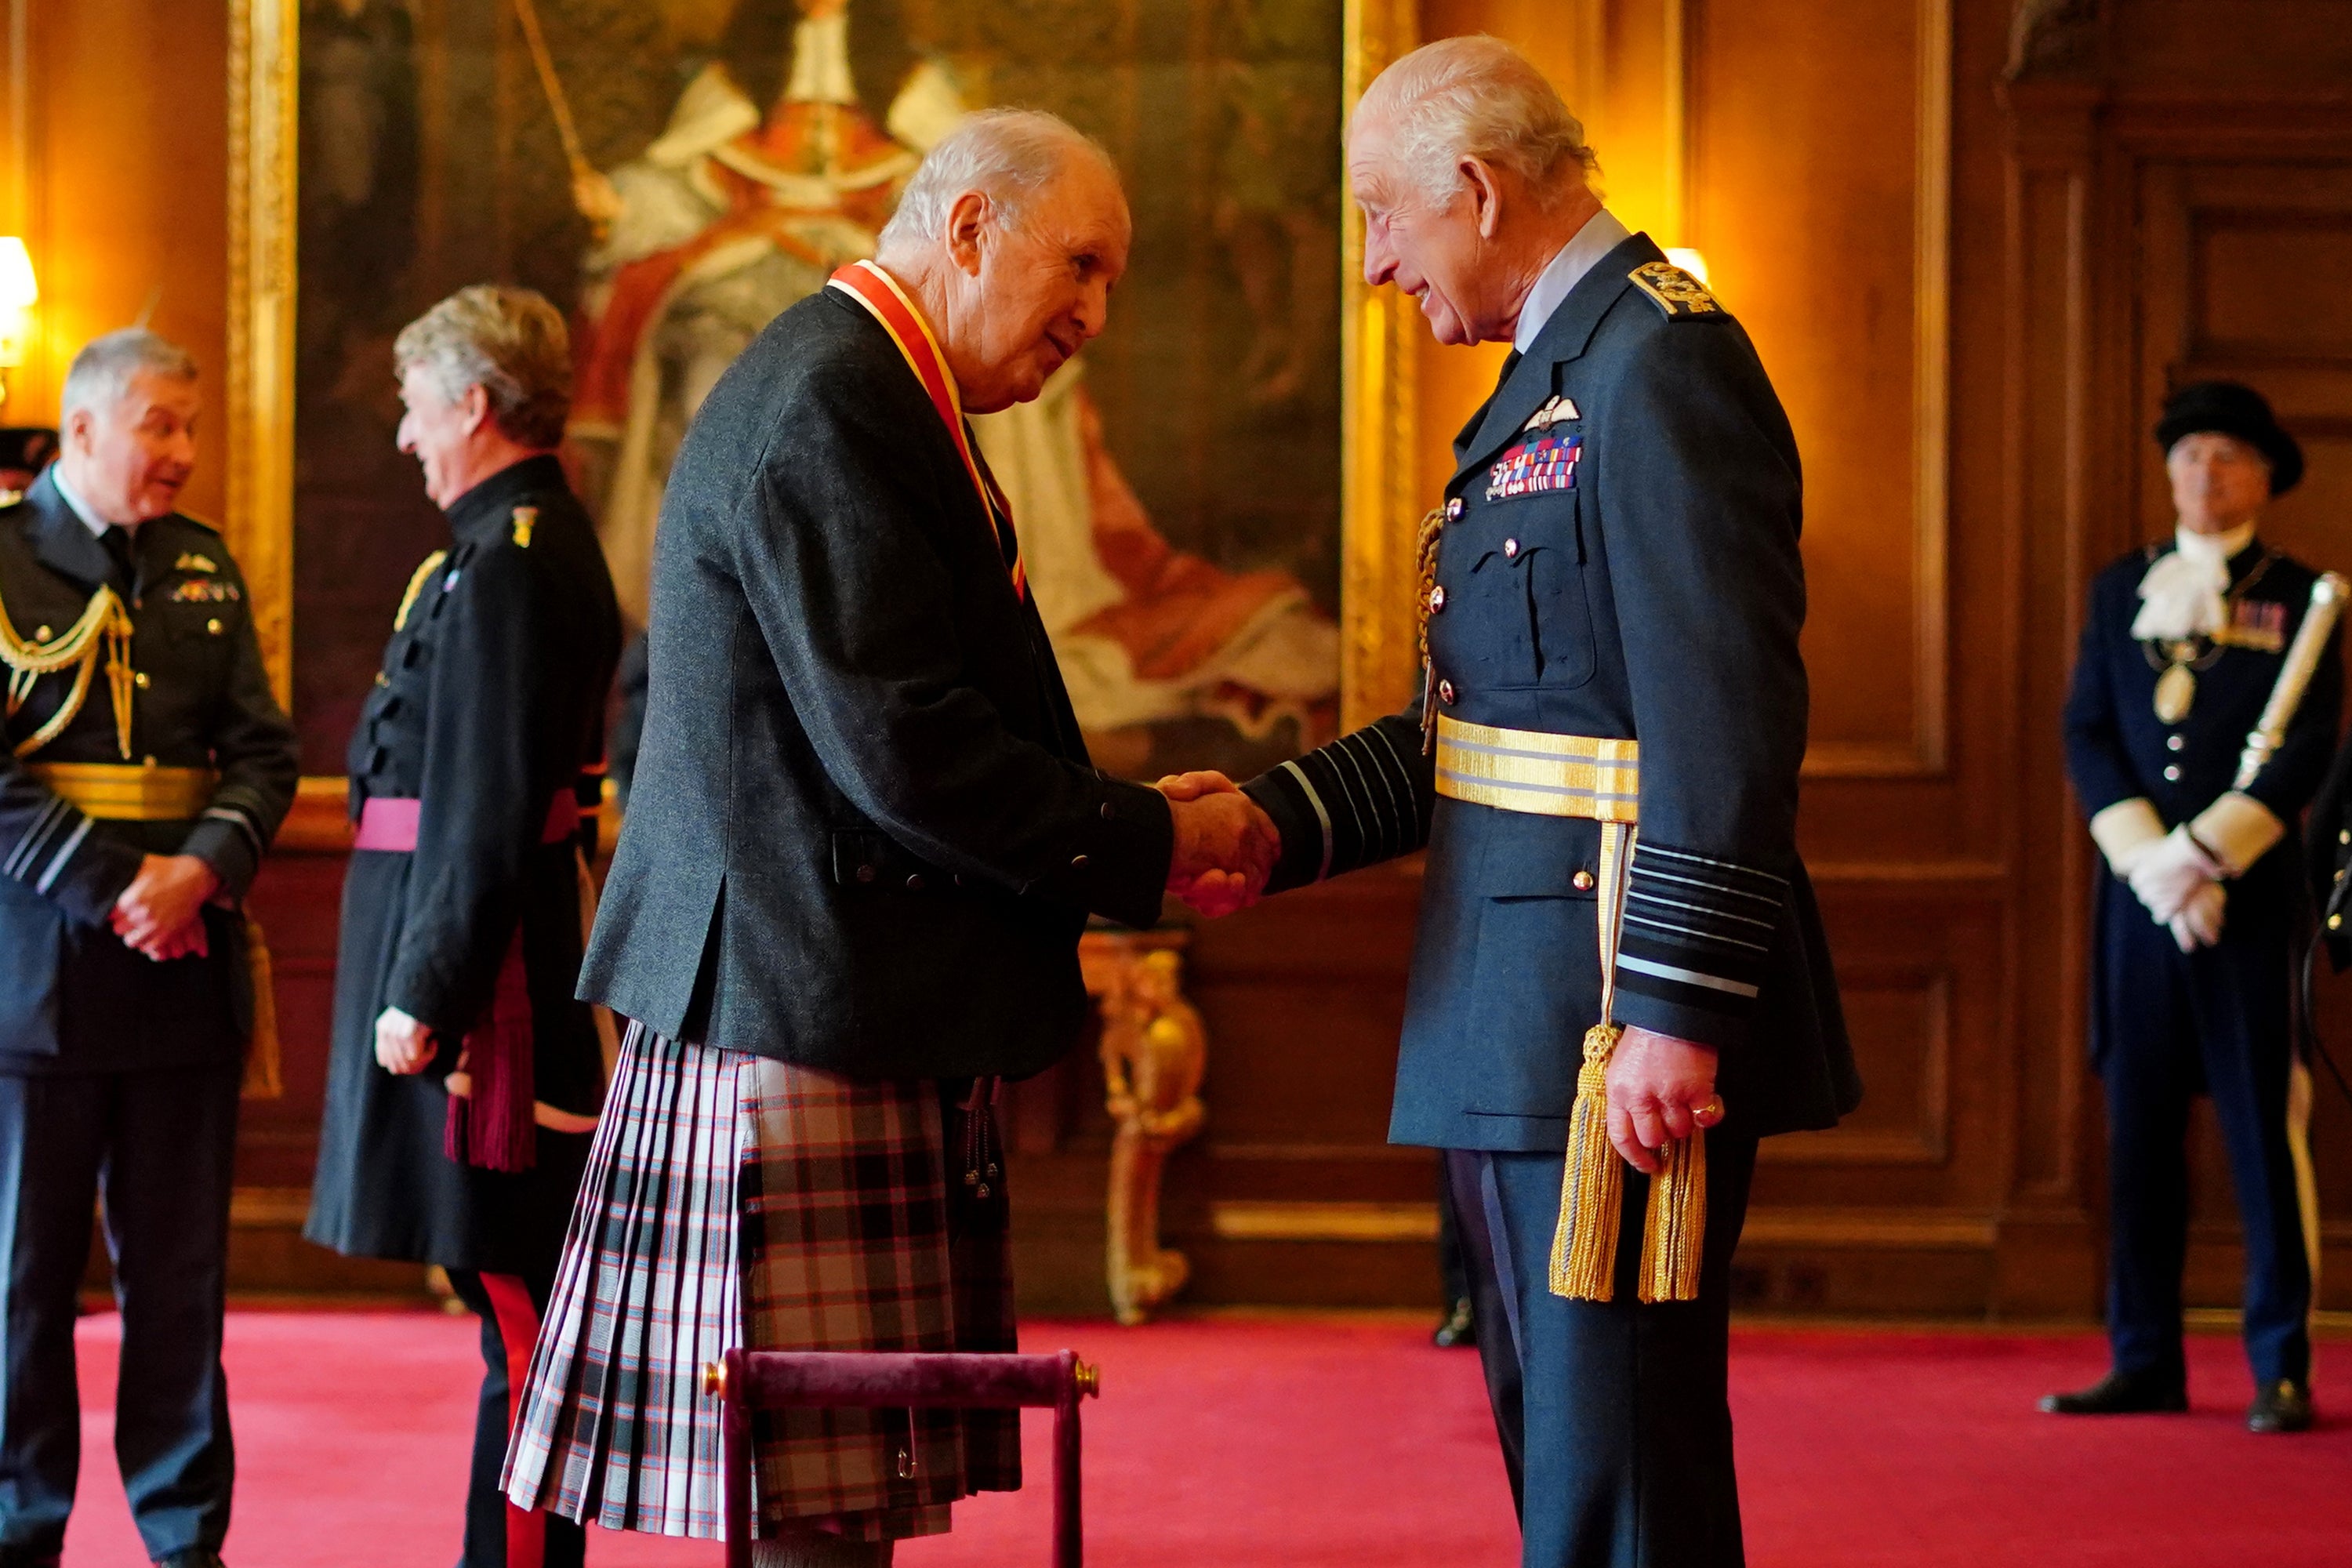 Sir Alexander McCall Smith said he enjoyed chatting to the King during the ceremony (Jane Barlow/PA)